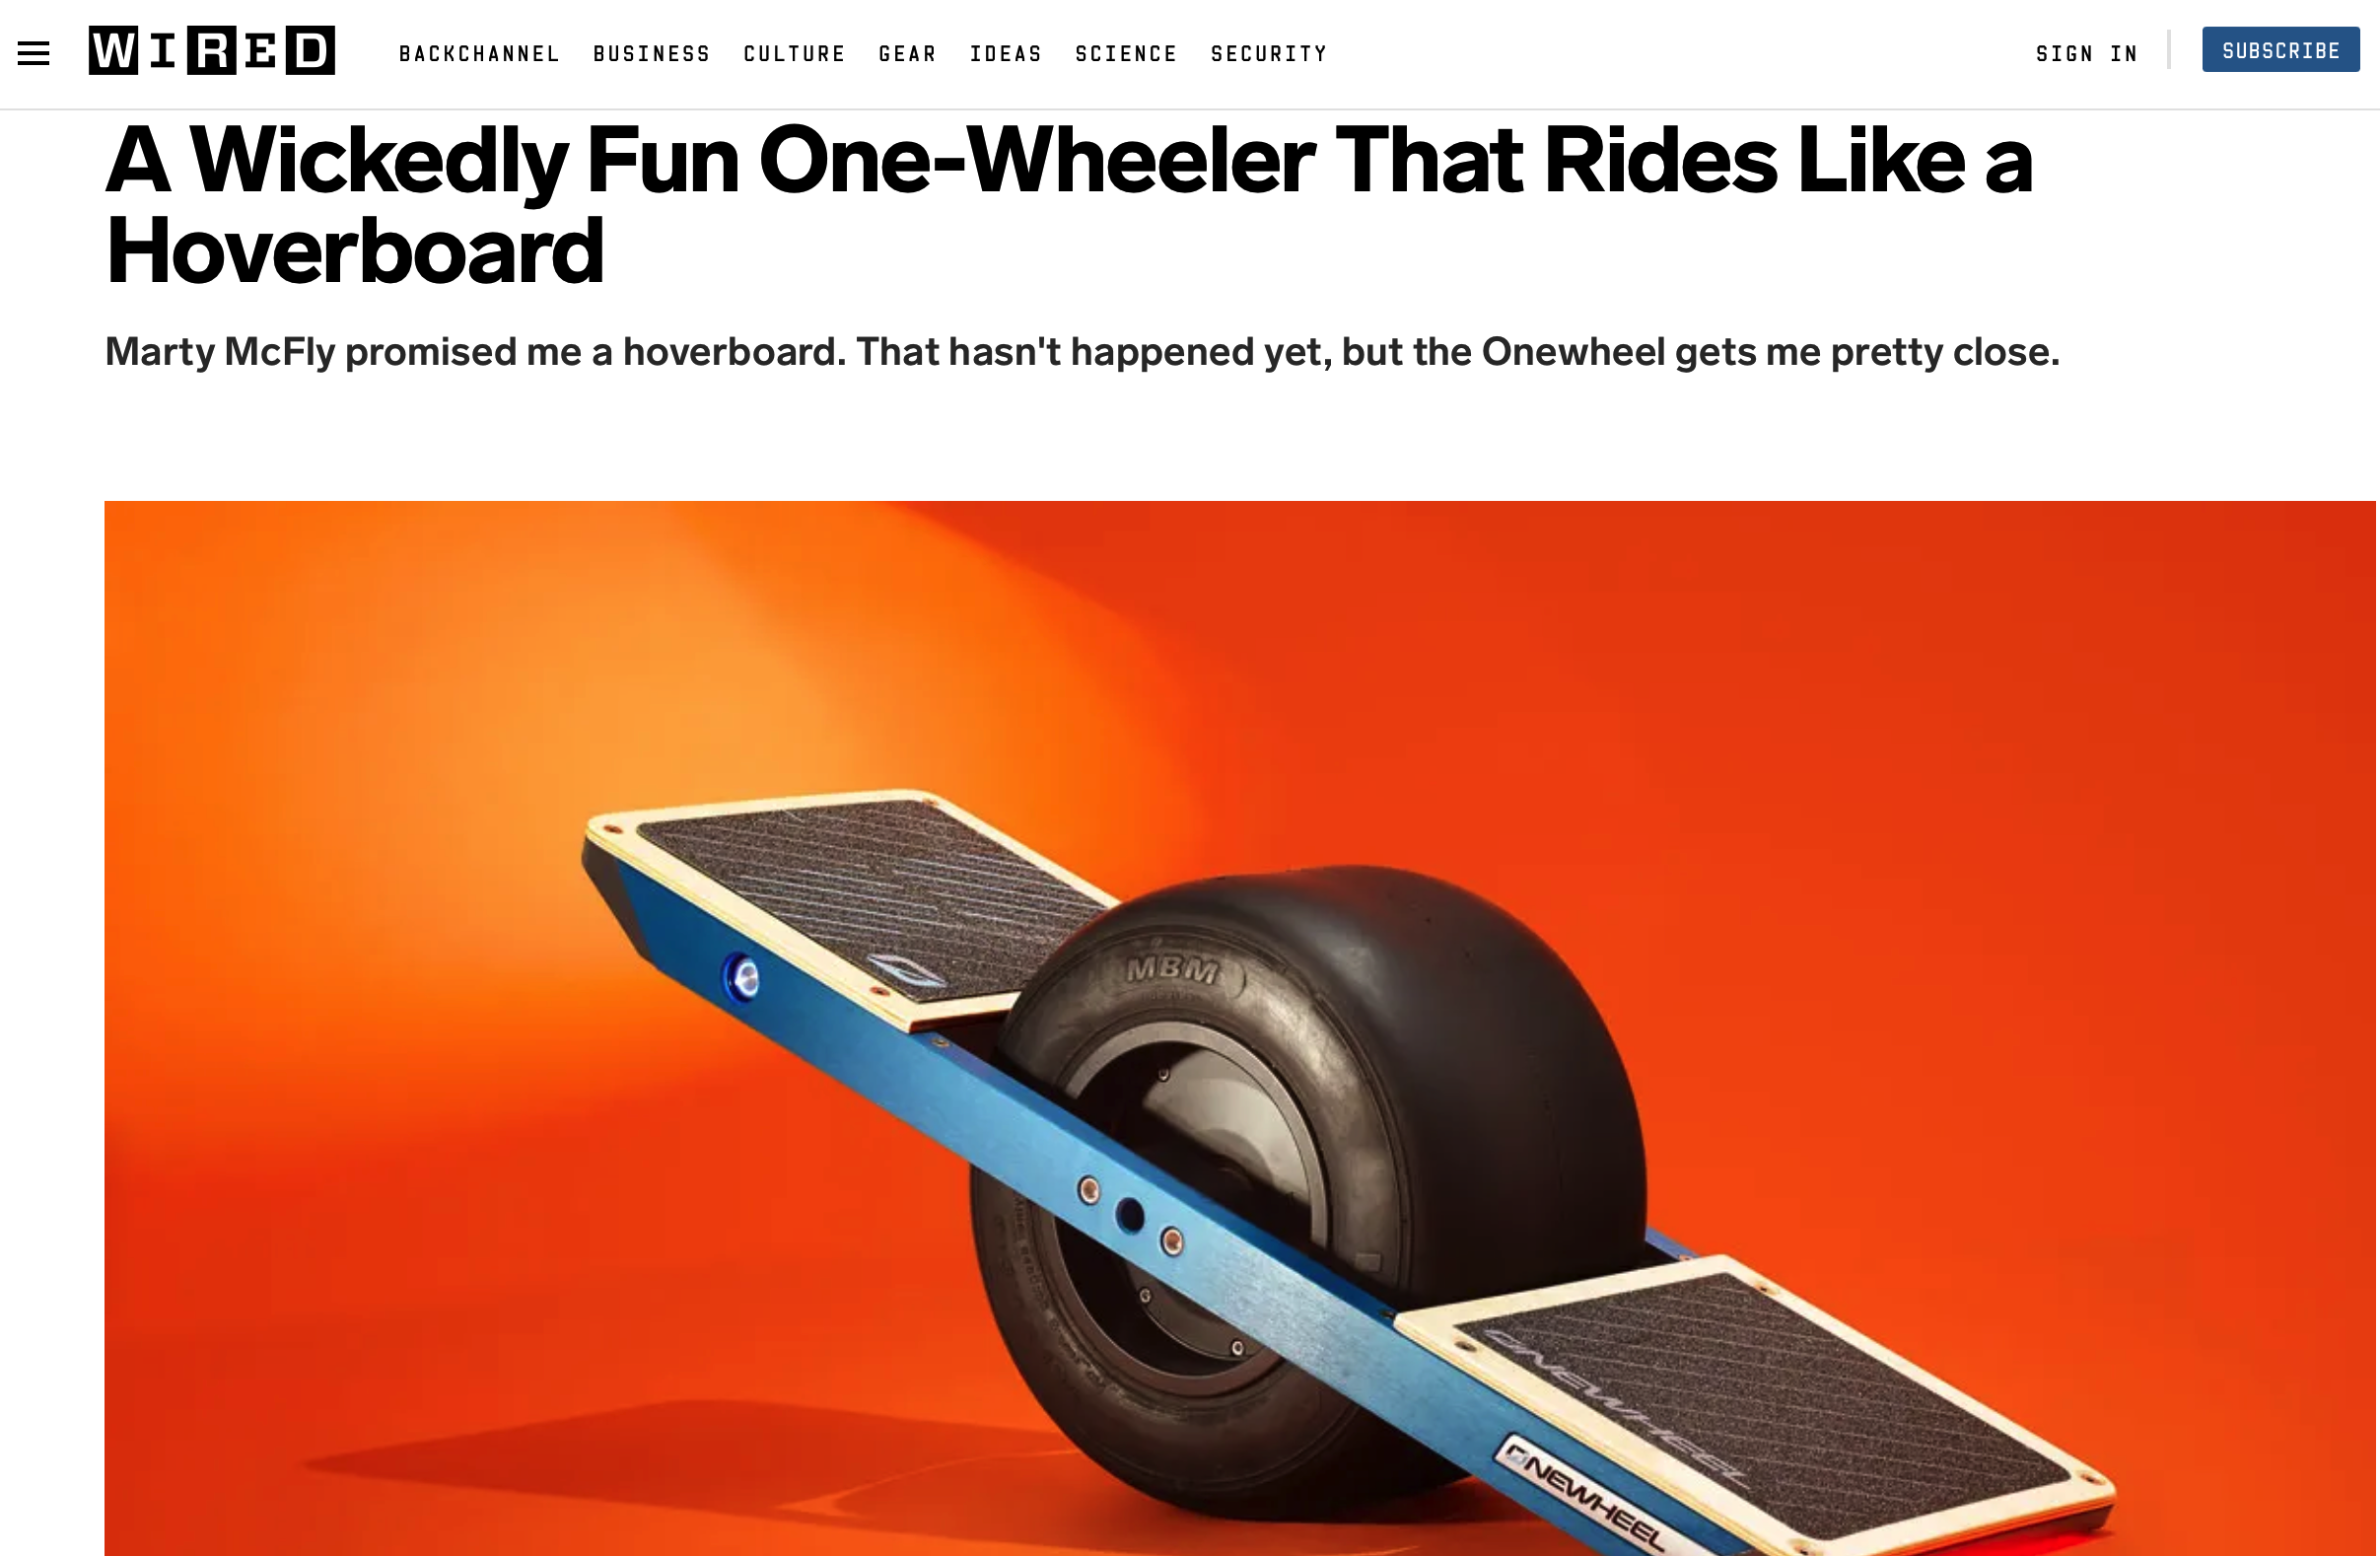 A Wickedly Fun One-Wheeler That Rides Like a Hoverboard